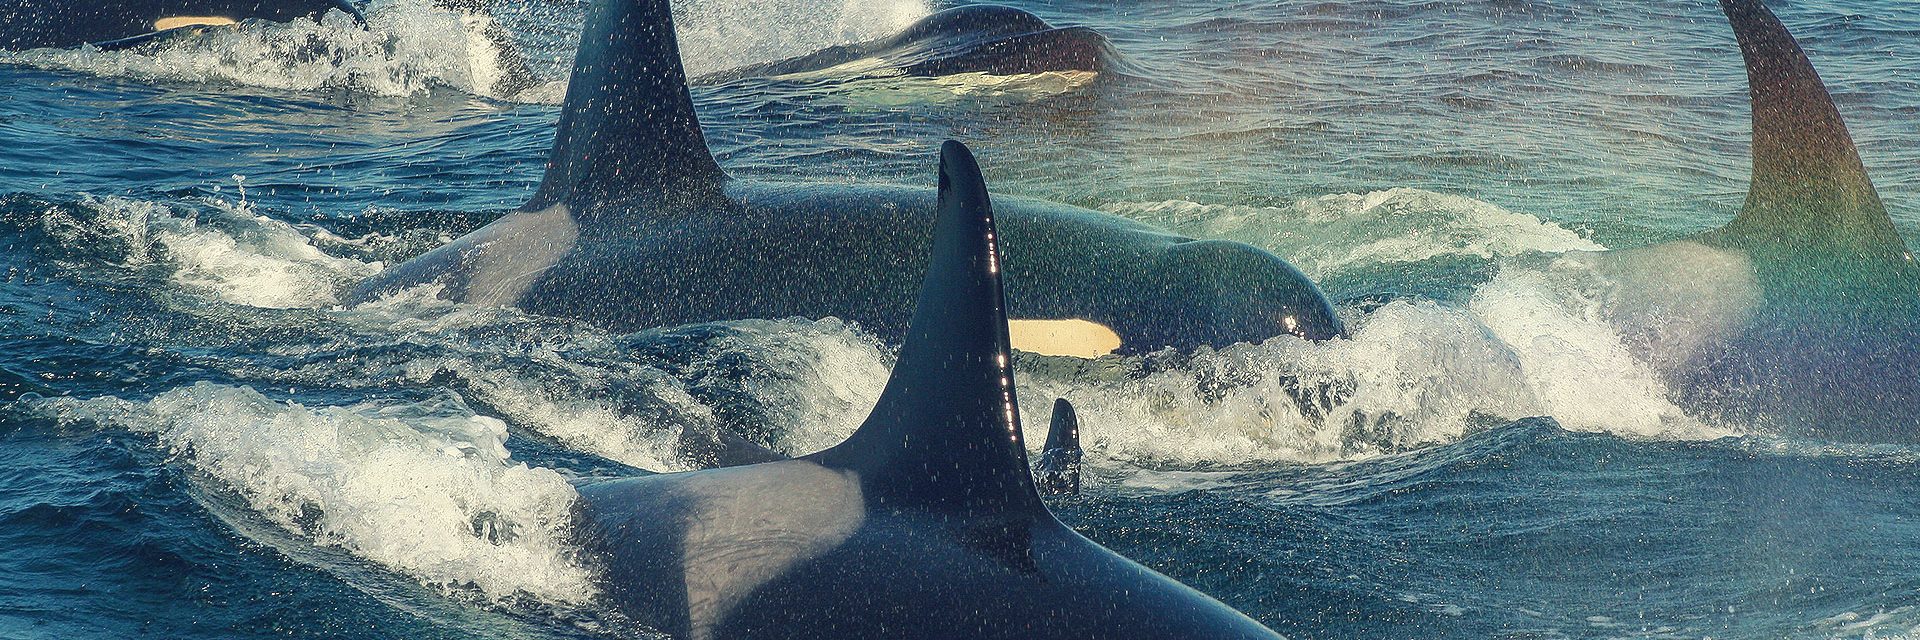 Orcas in the wild